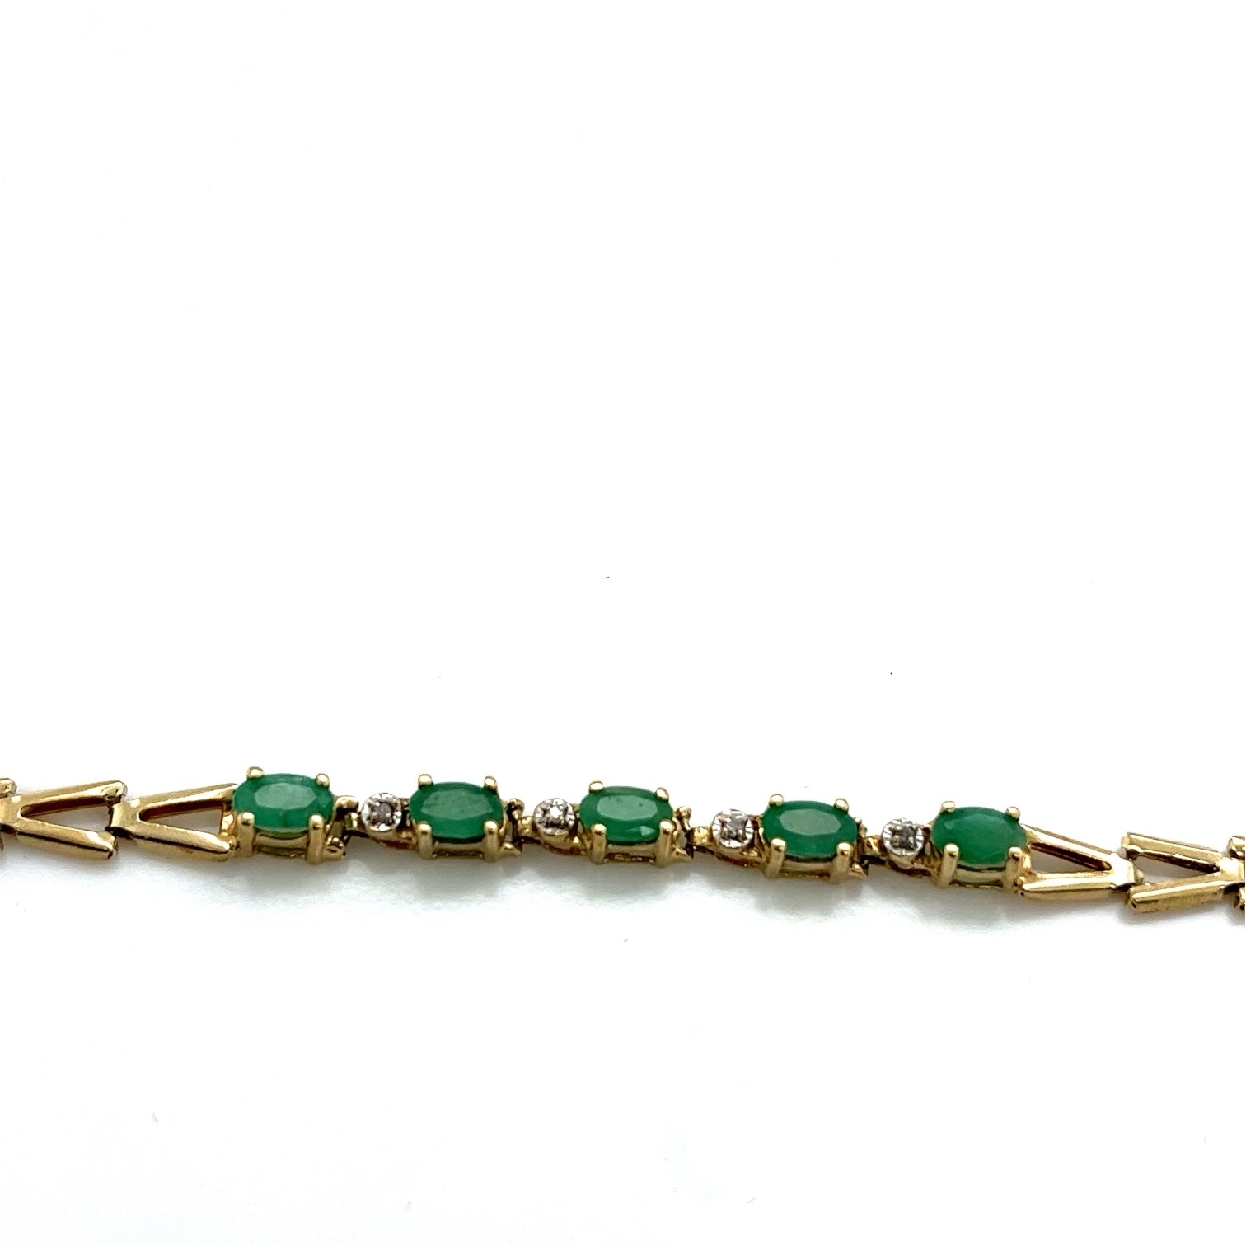 10K Yellow Gold Emerald and Diamond Accented Bracelet
7 Inches